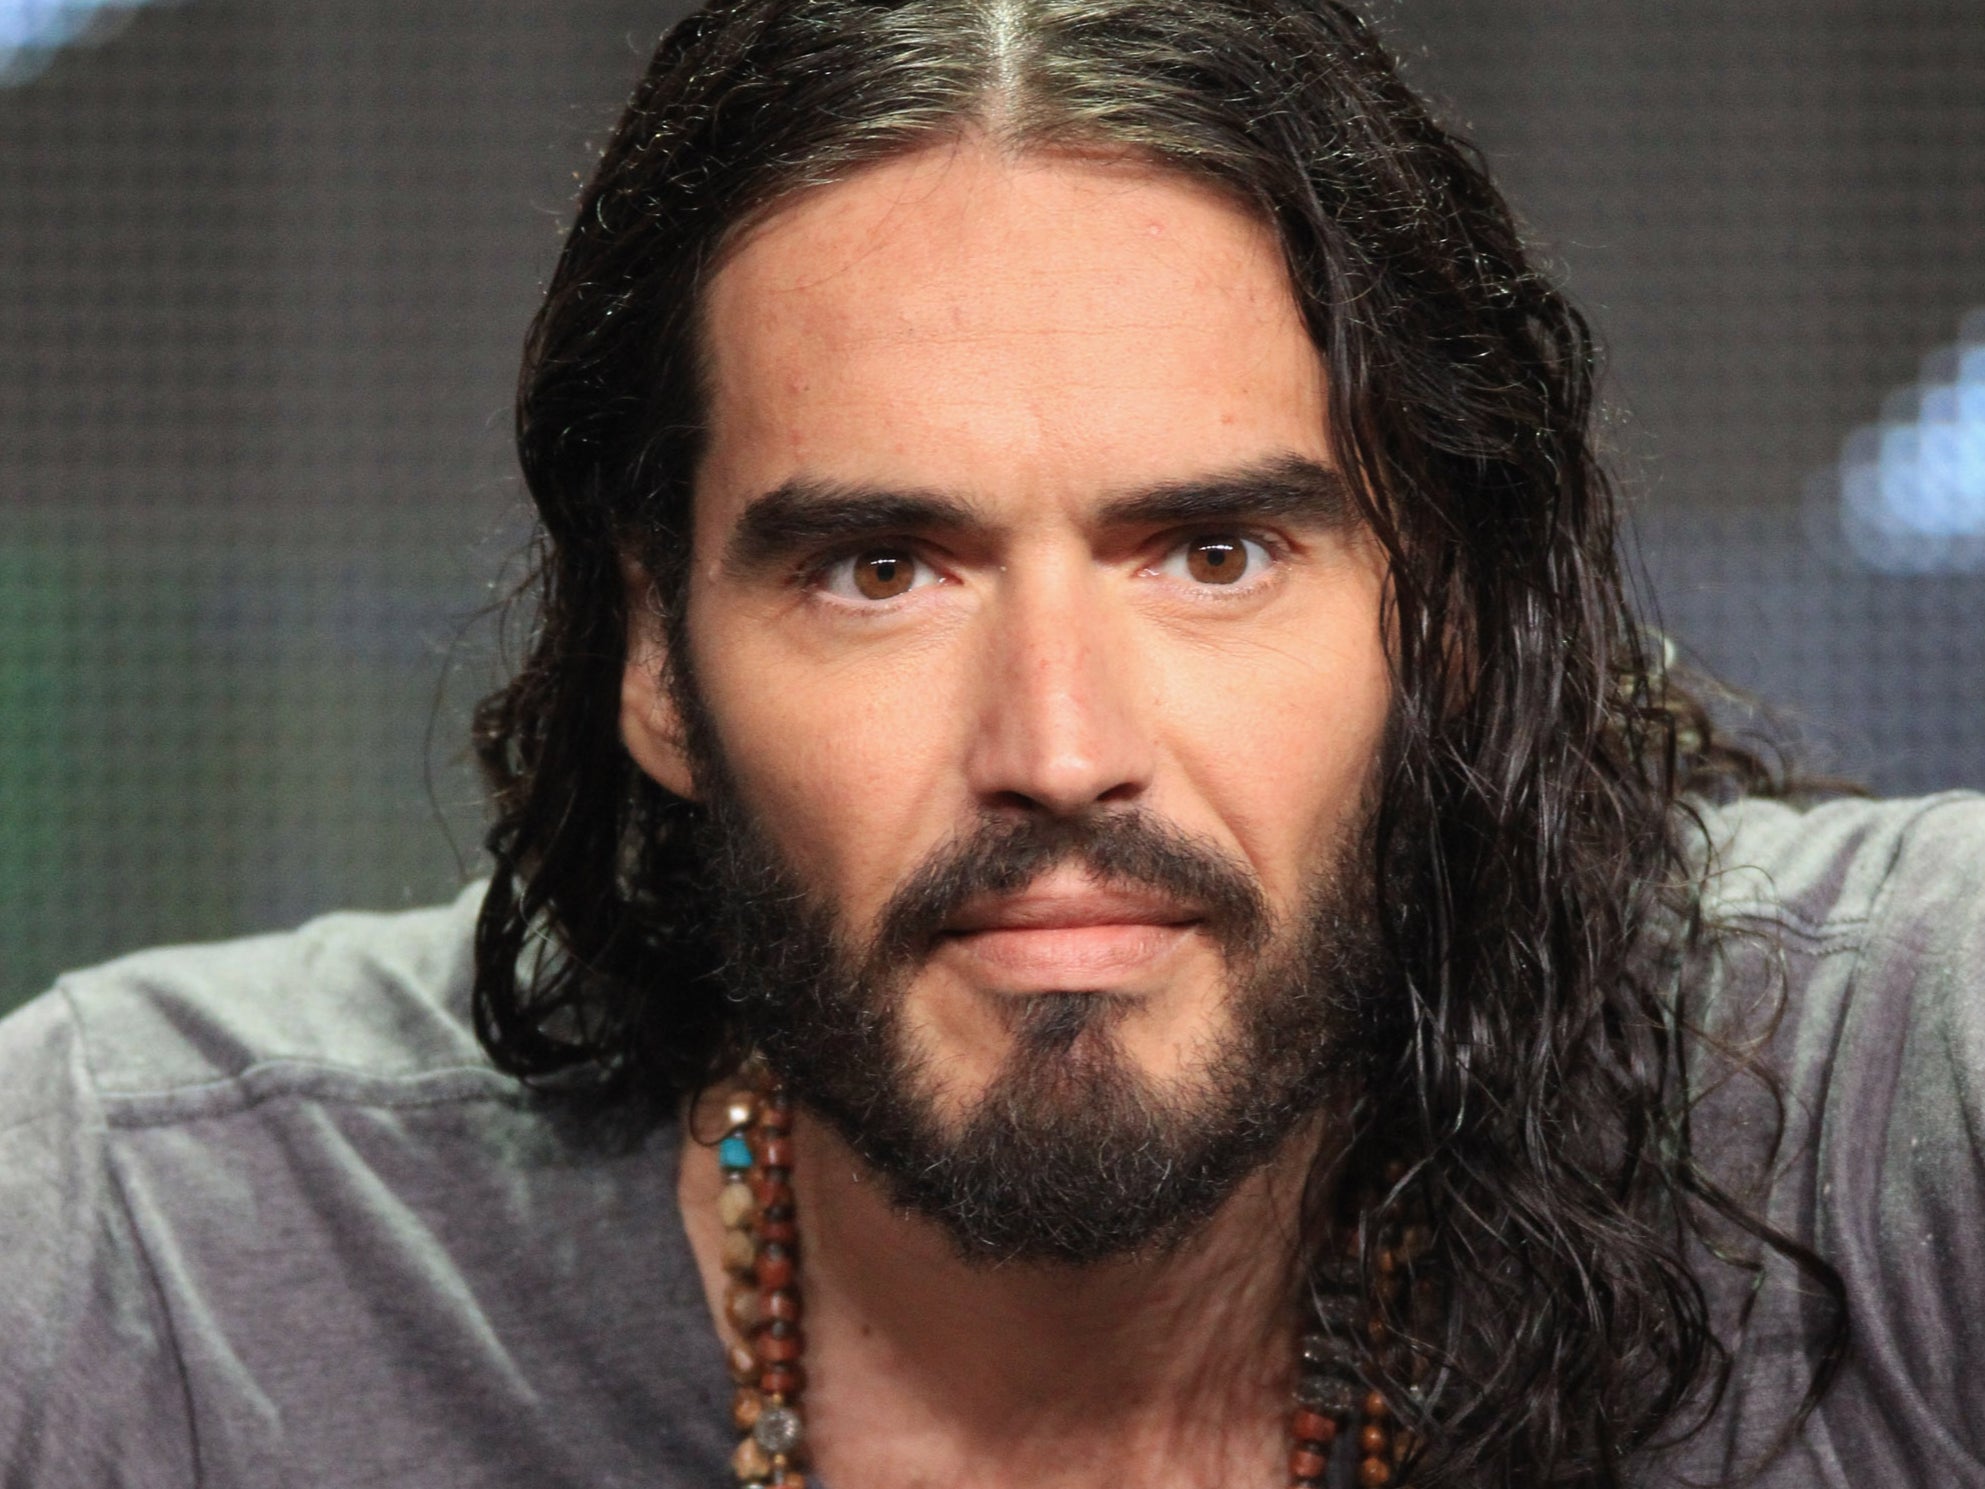 Calls to change age of consent laws amid Russell Brand allegations ...